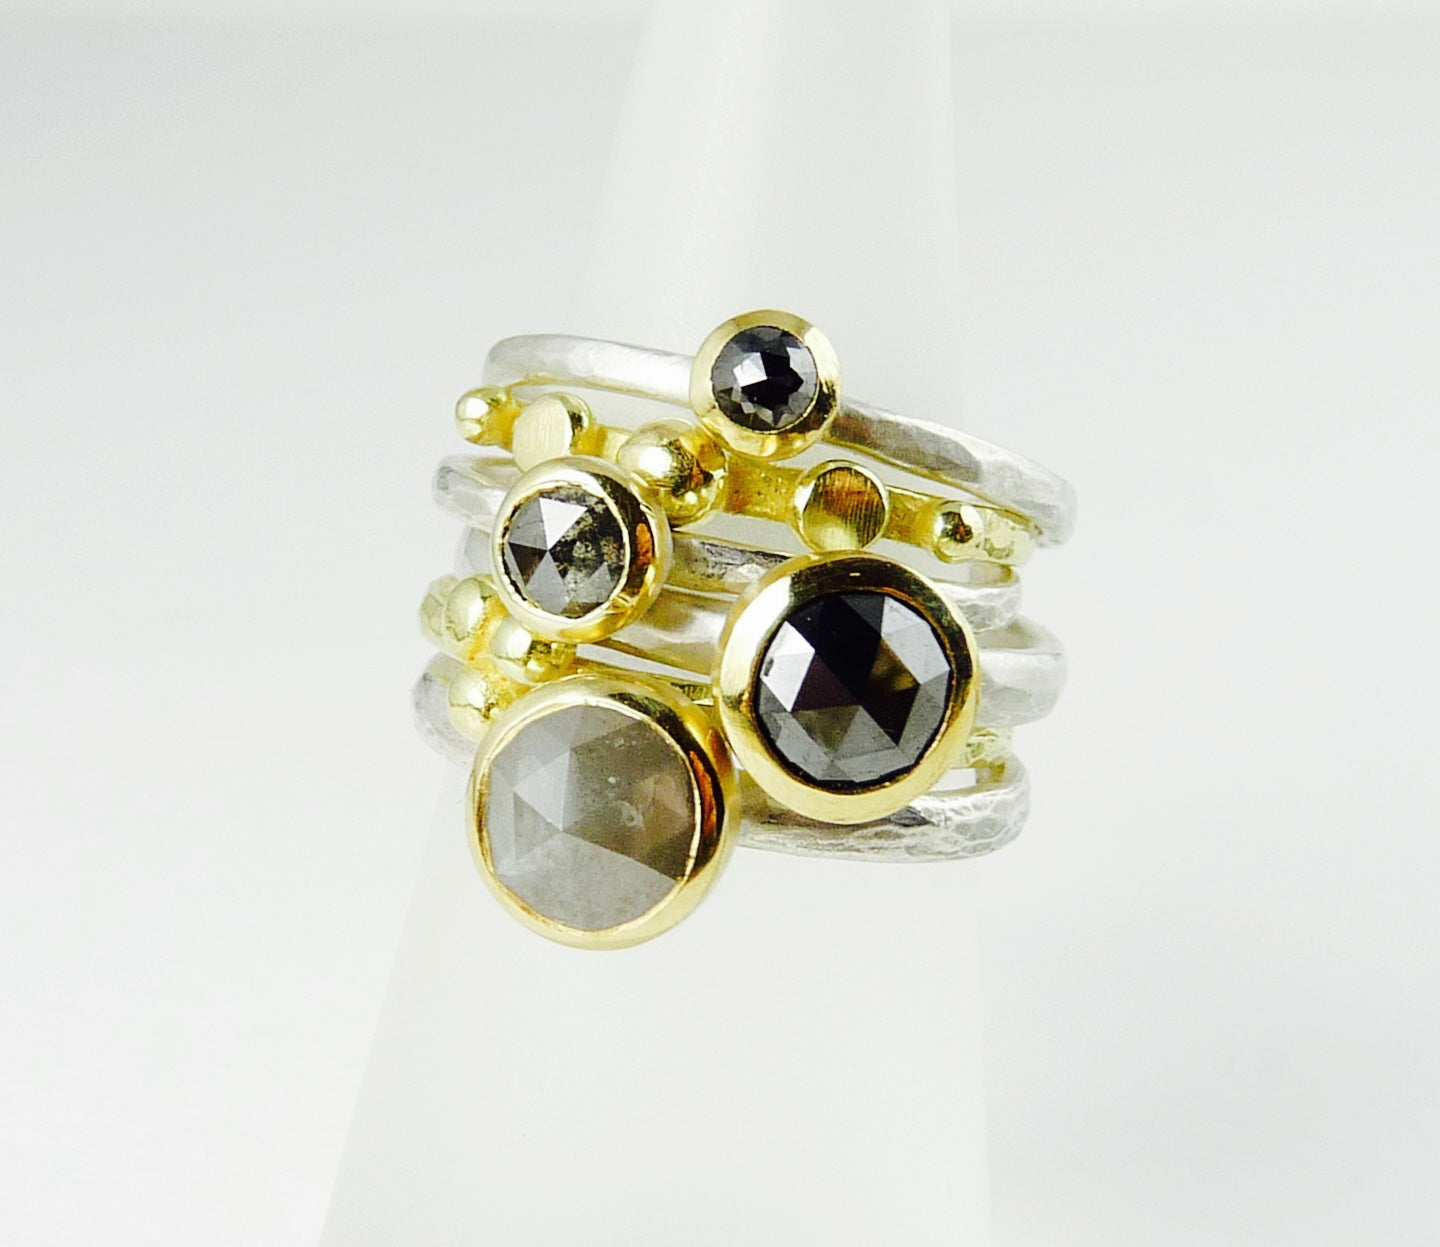 Rose Cut Black Diamond Ring in 18ct Gold and Silver